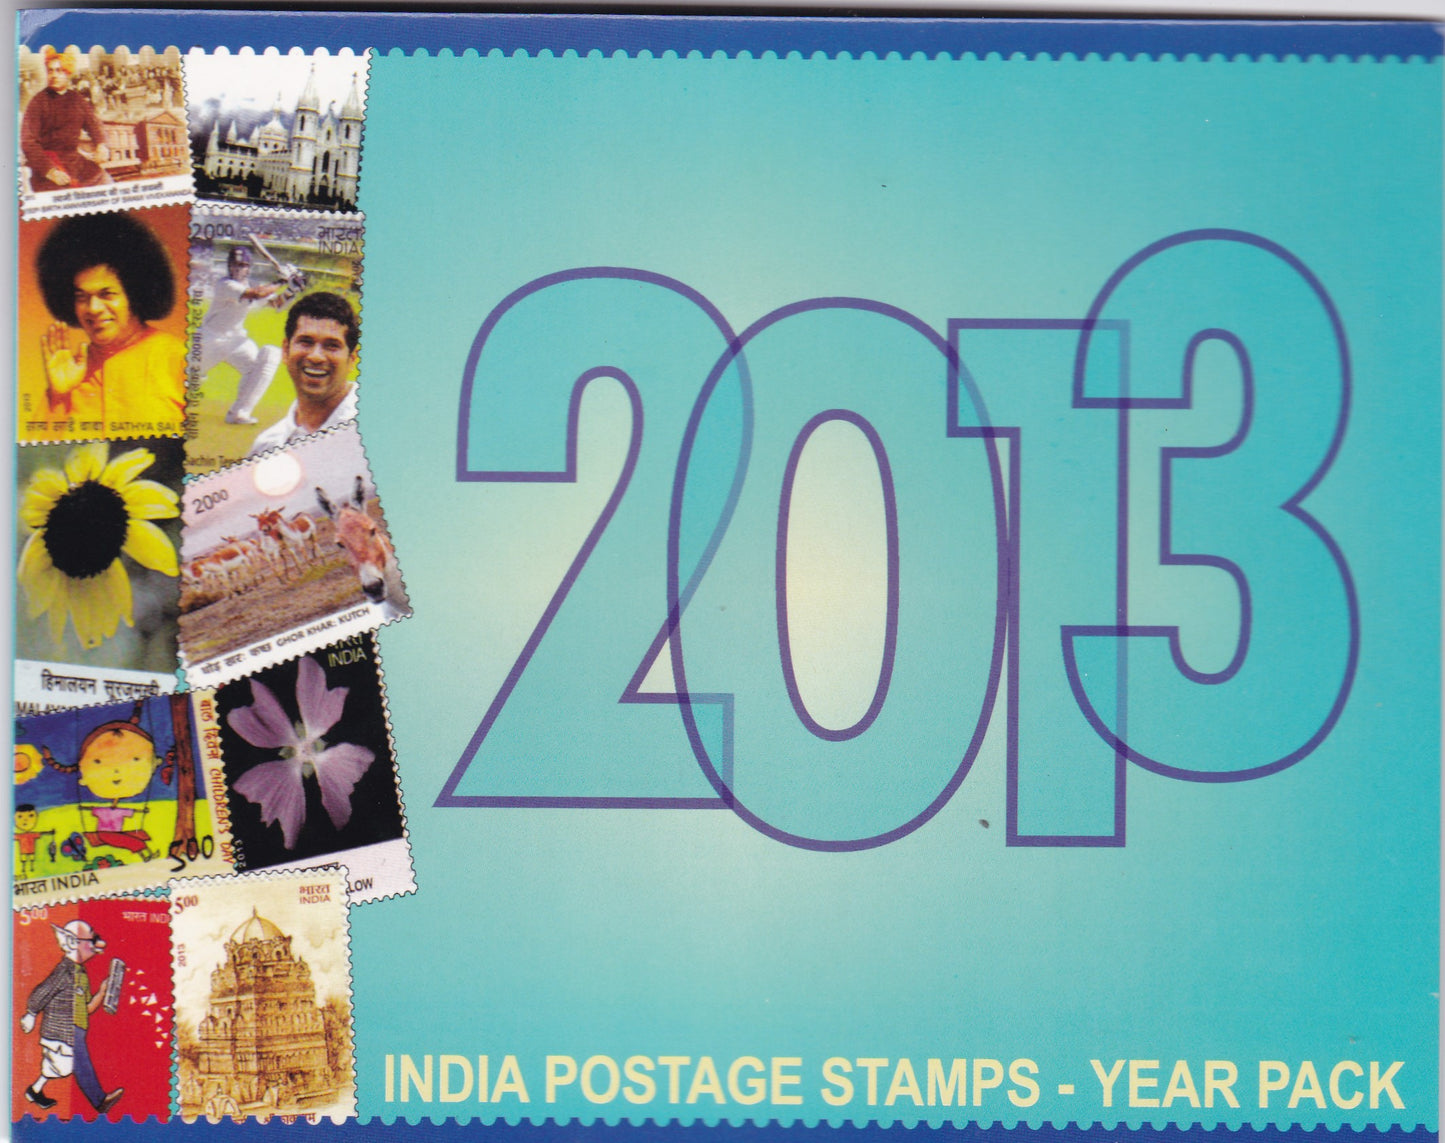 India-Postage Stamps Year Pack-2013